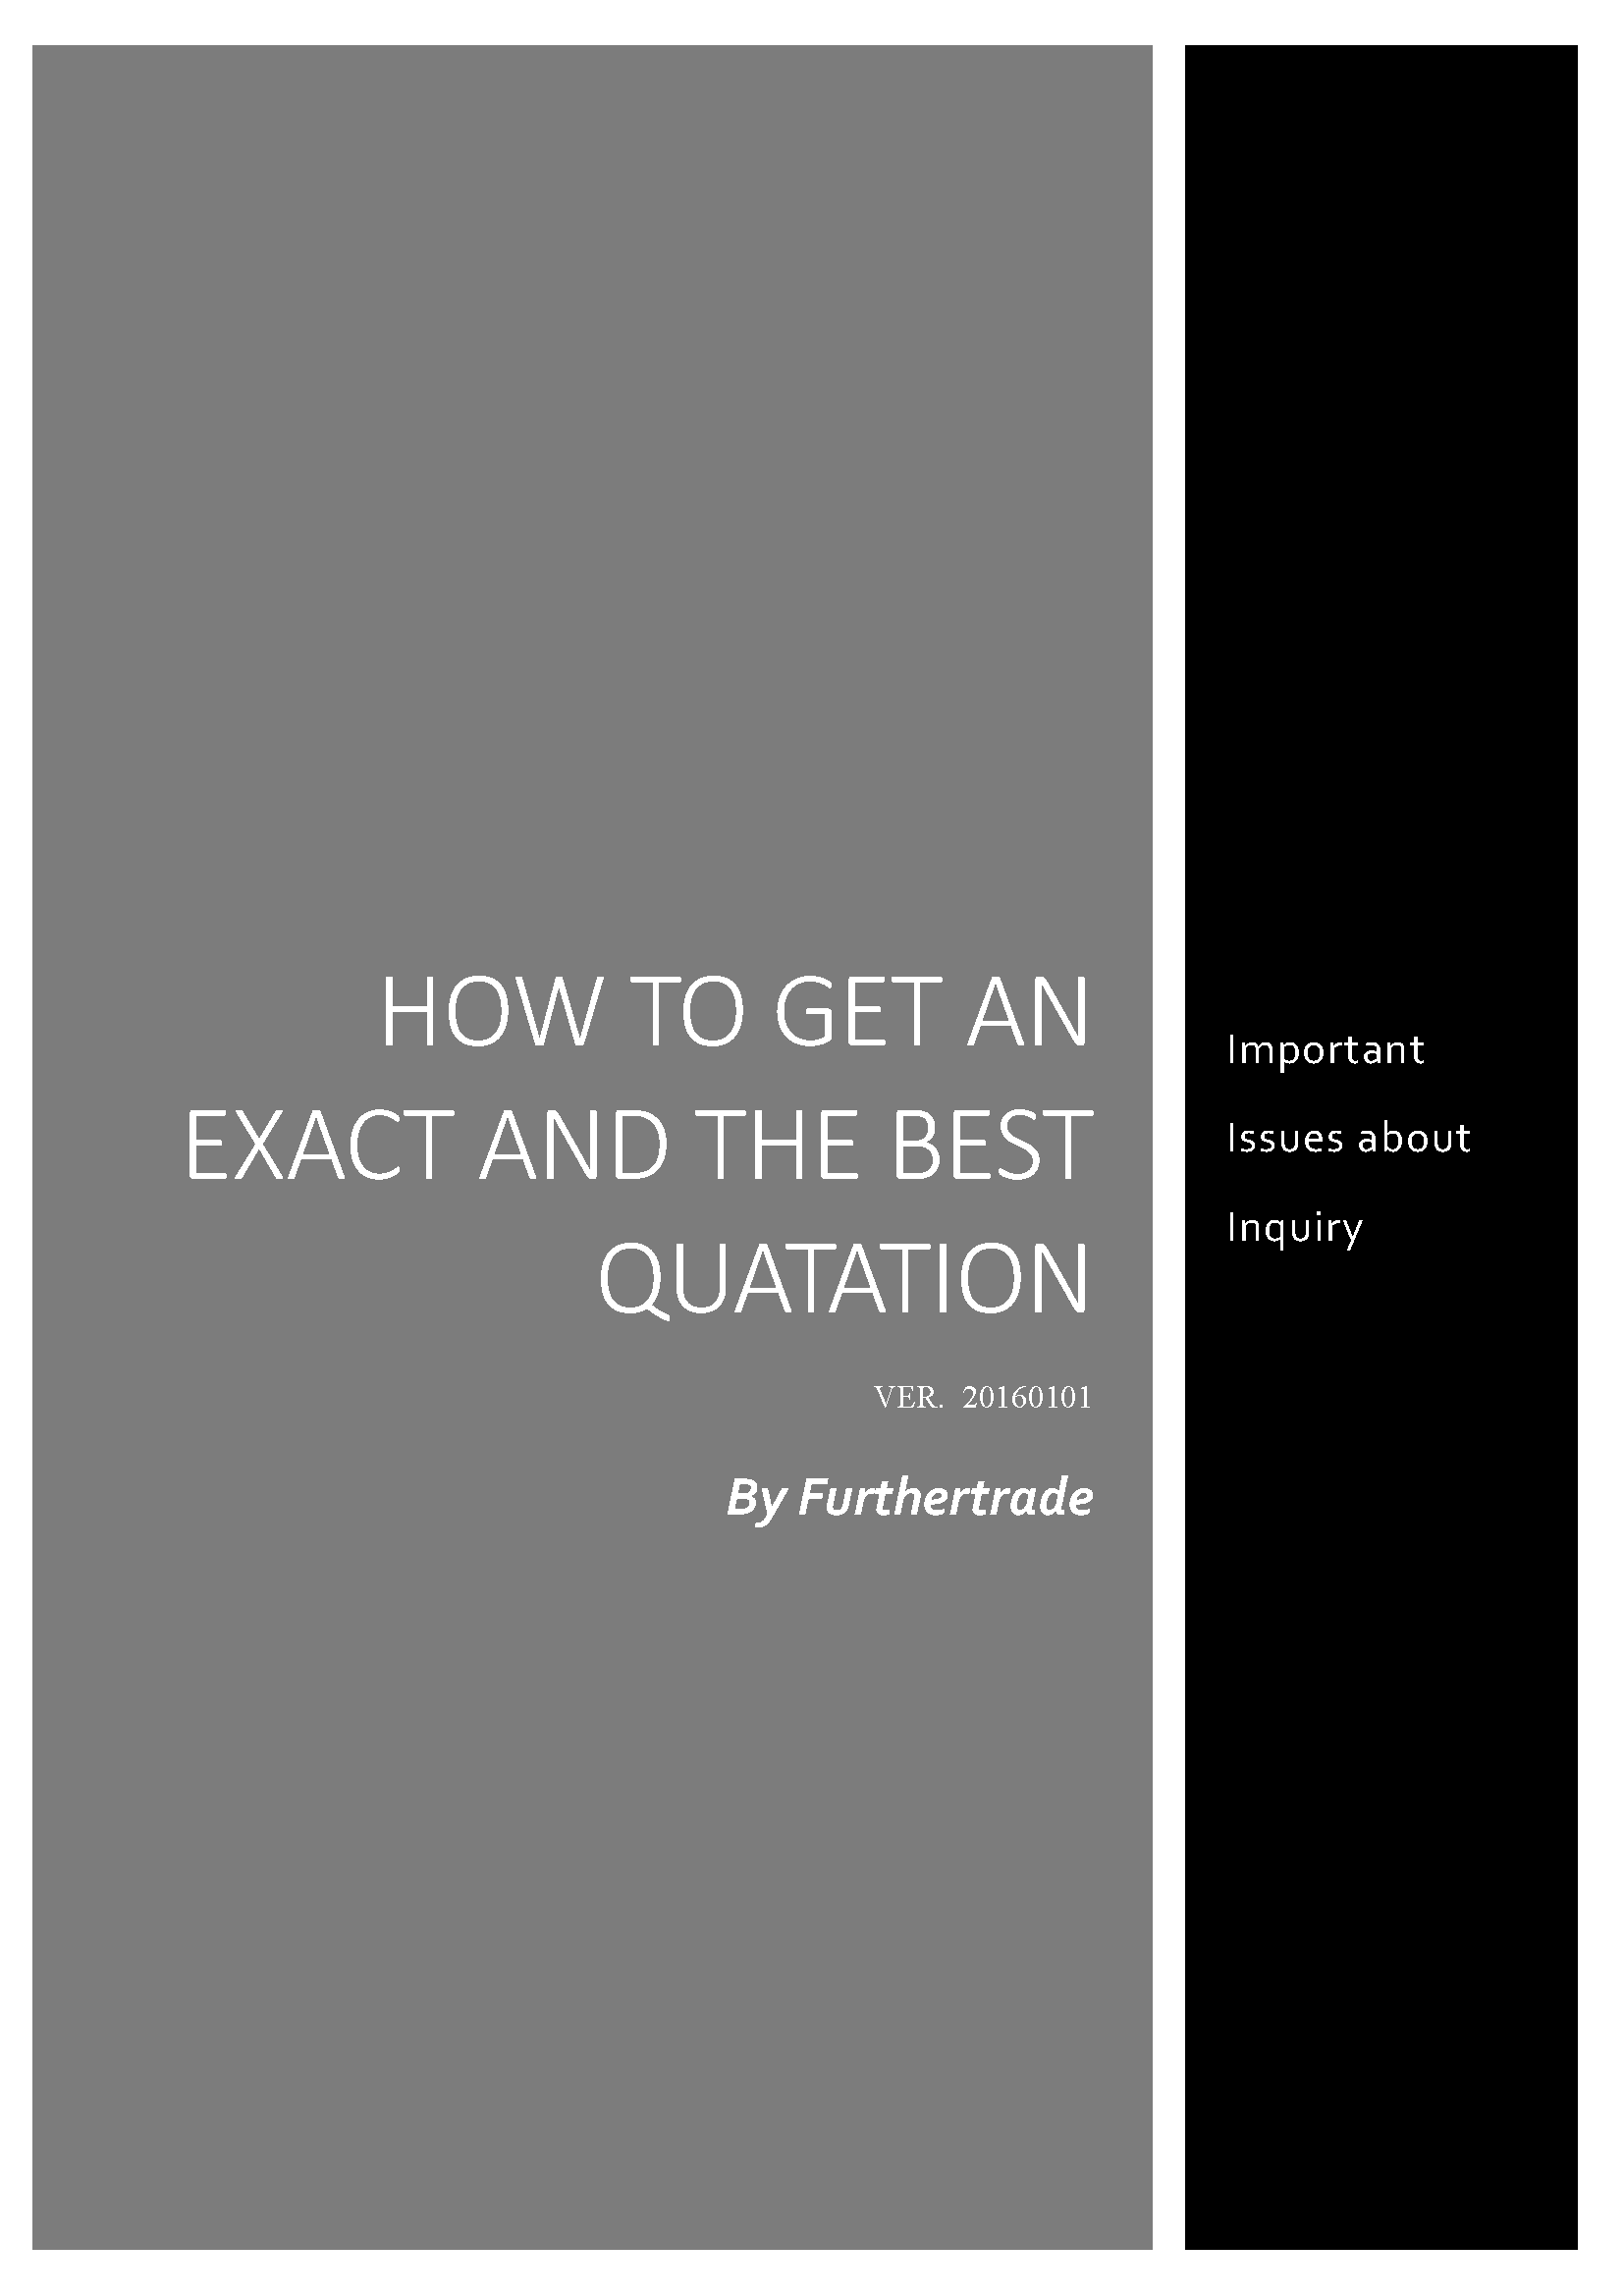 HOW TO GET AN EXACT AND THE BEST QUOTATION